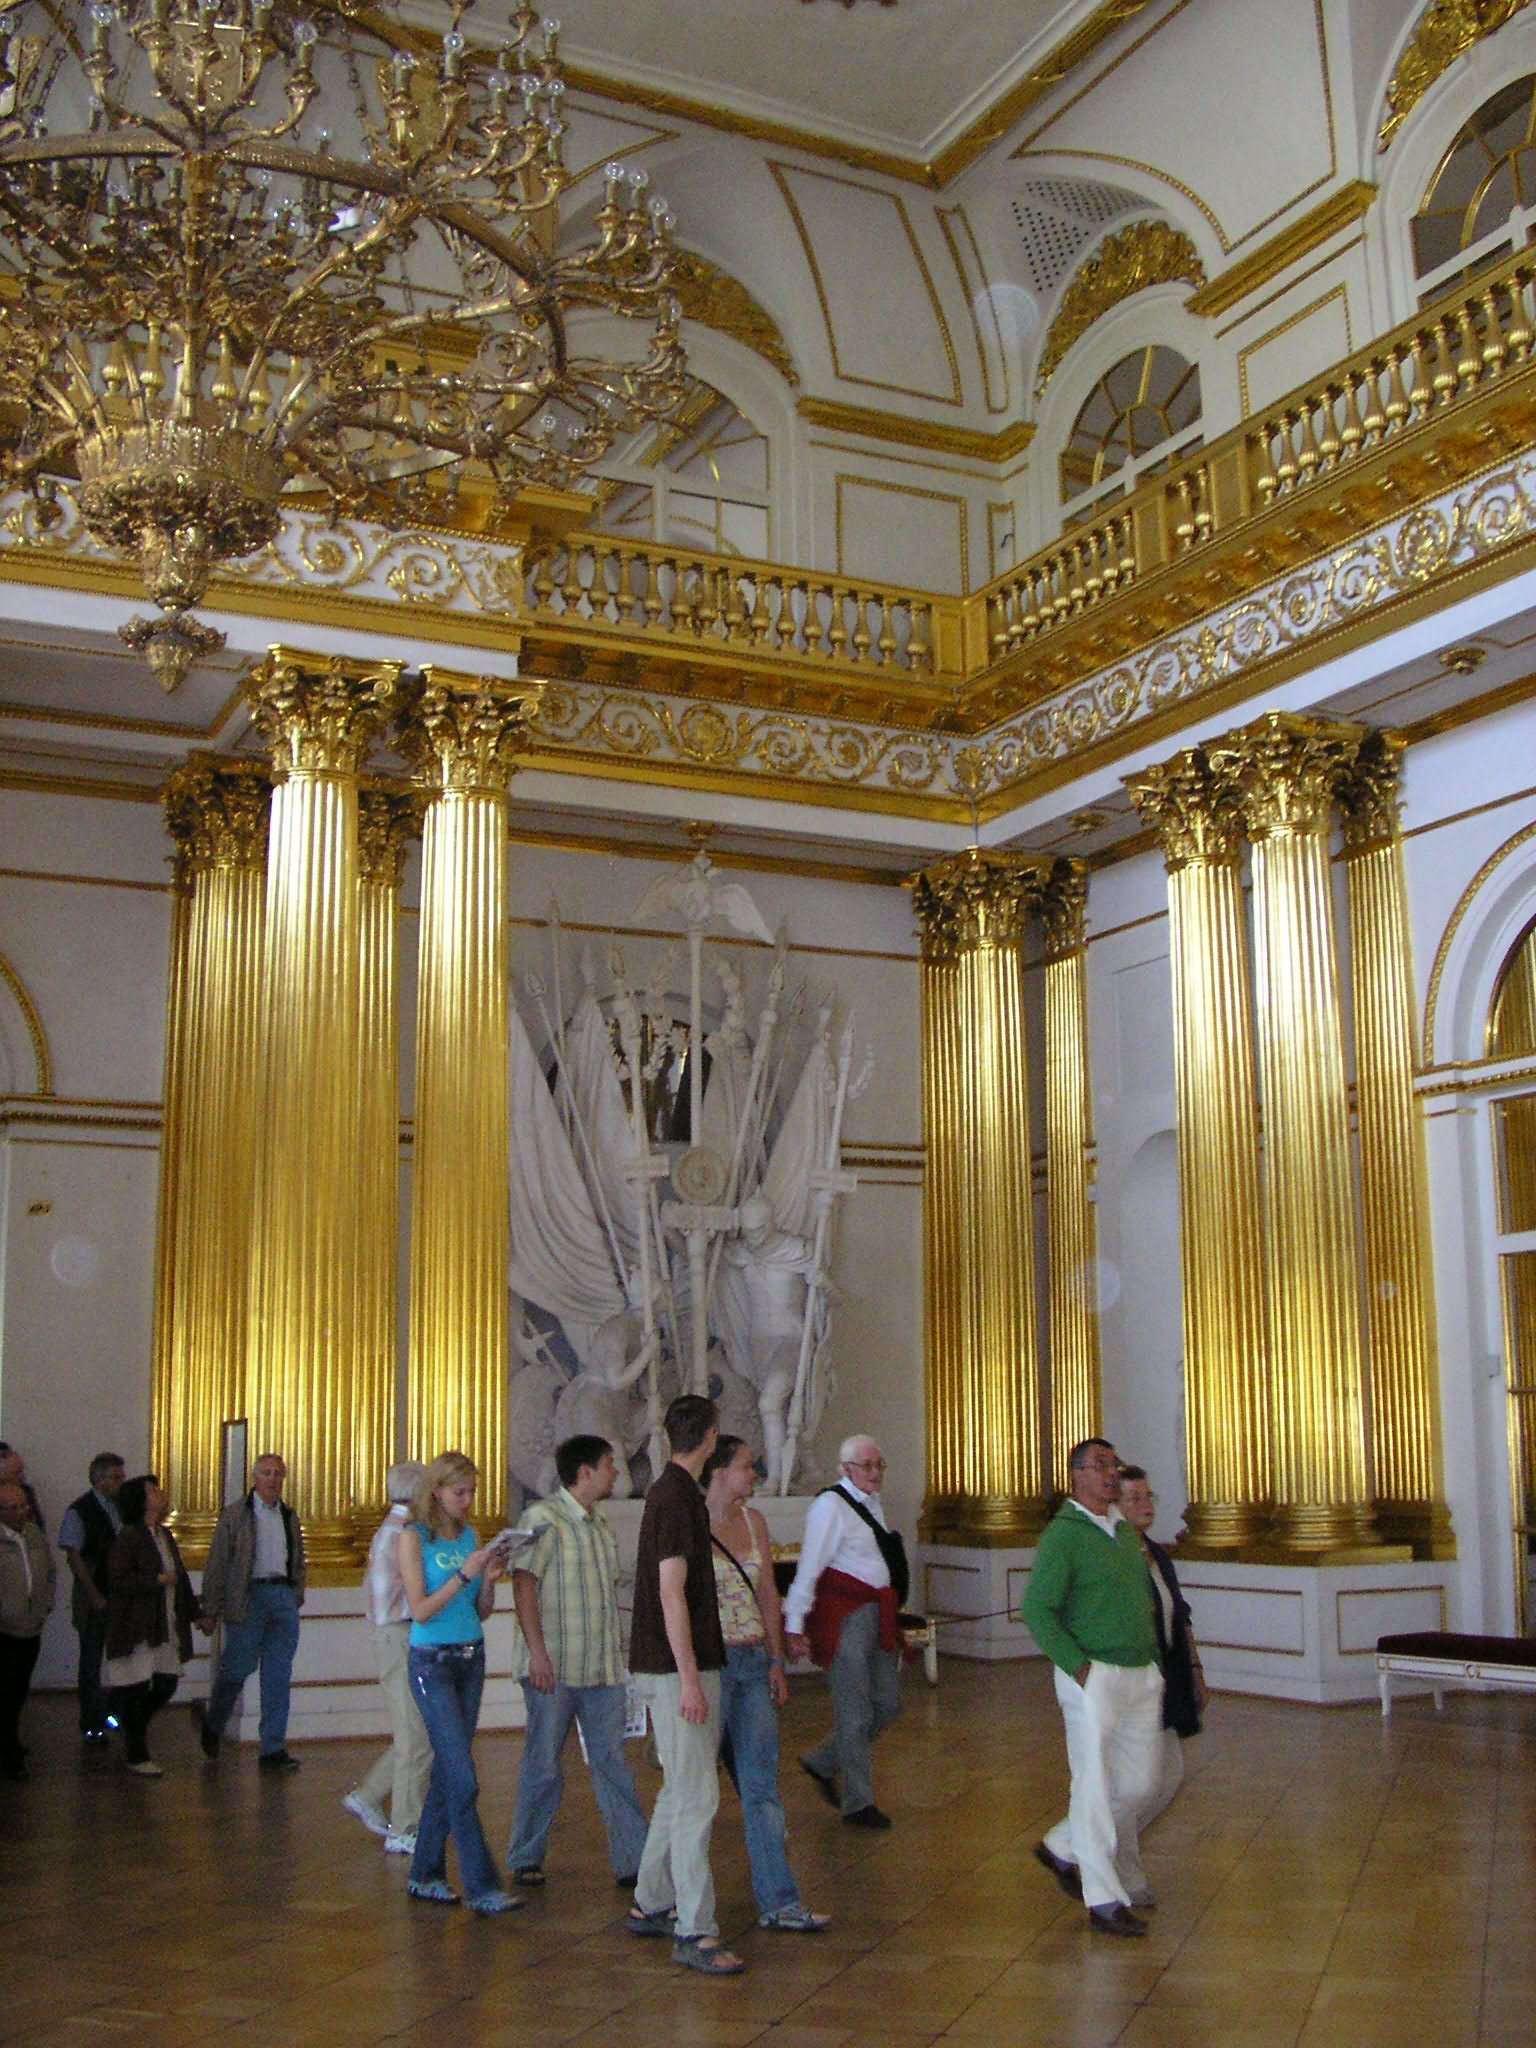 Hall Inside The Hermitage Museum, Russia